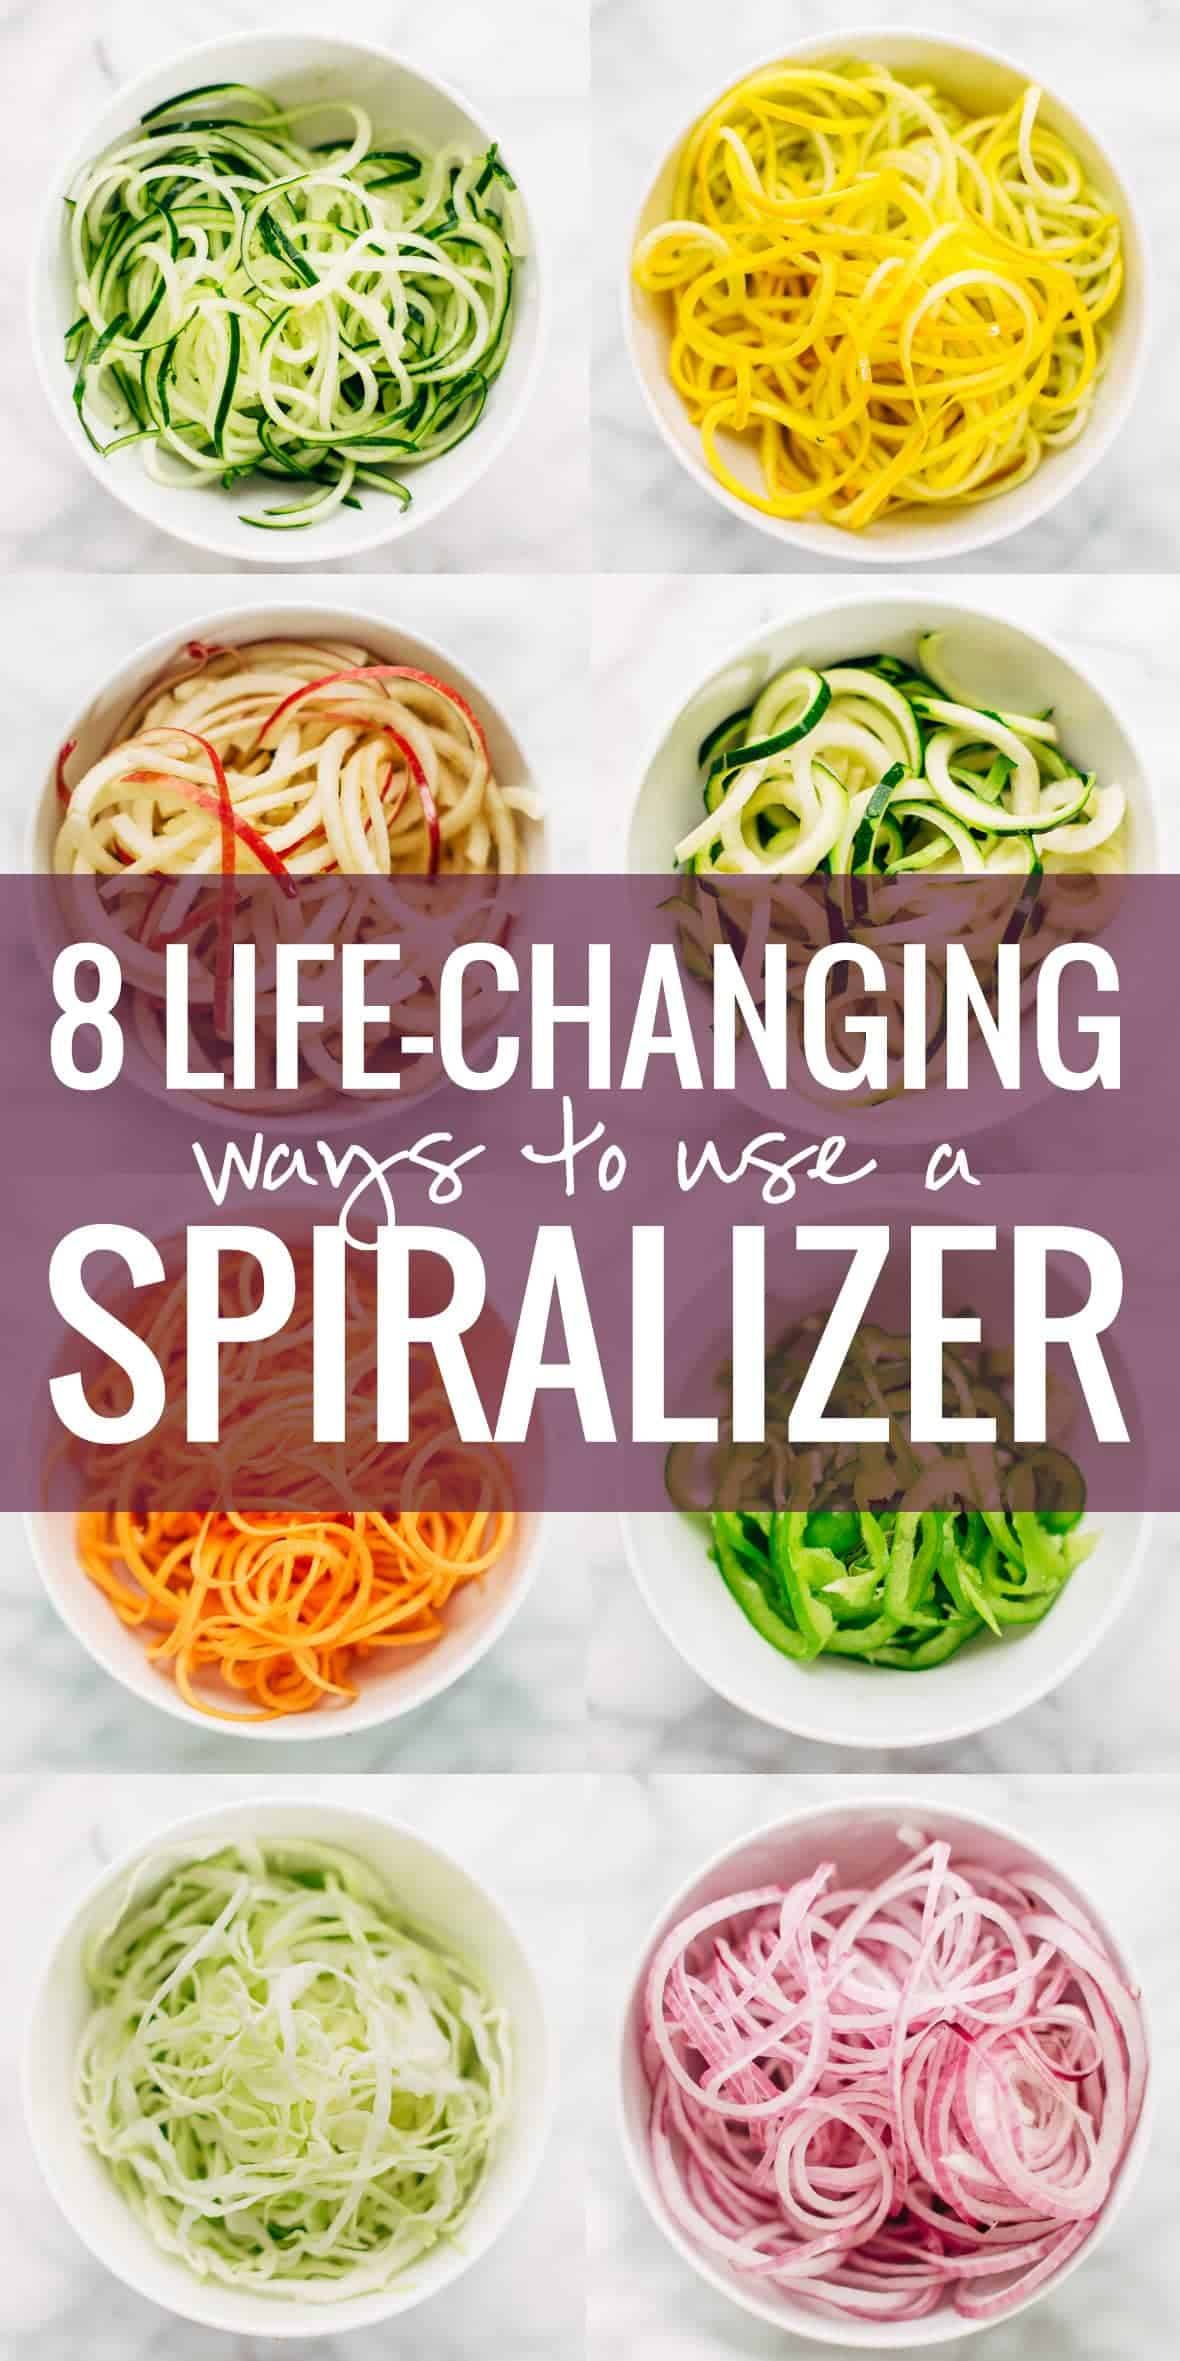 8 Life-Changing Ways to Use a Spiralizer! This little $30 kitchen gadget makes healthy eating super fun and easy! | pinchofyum.com